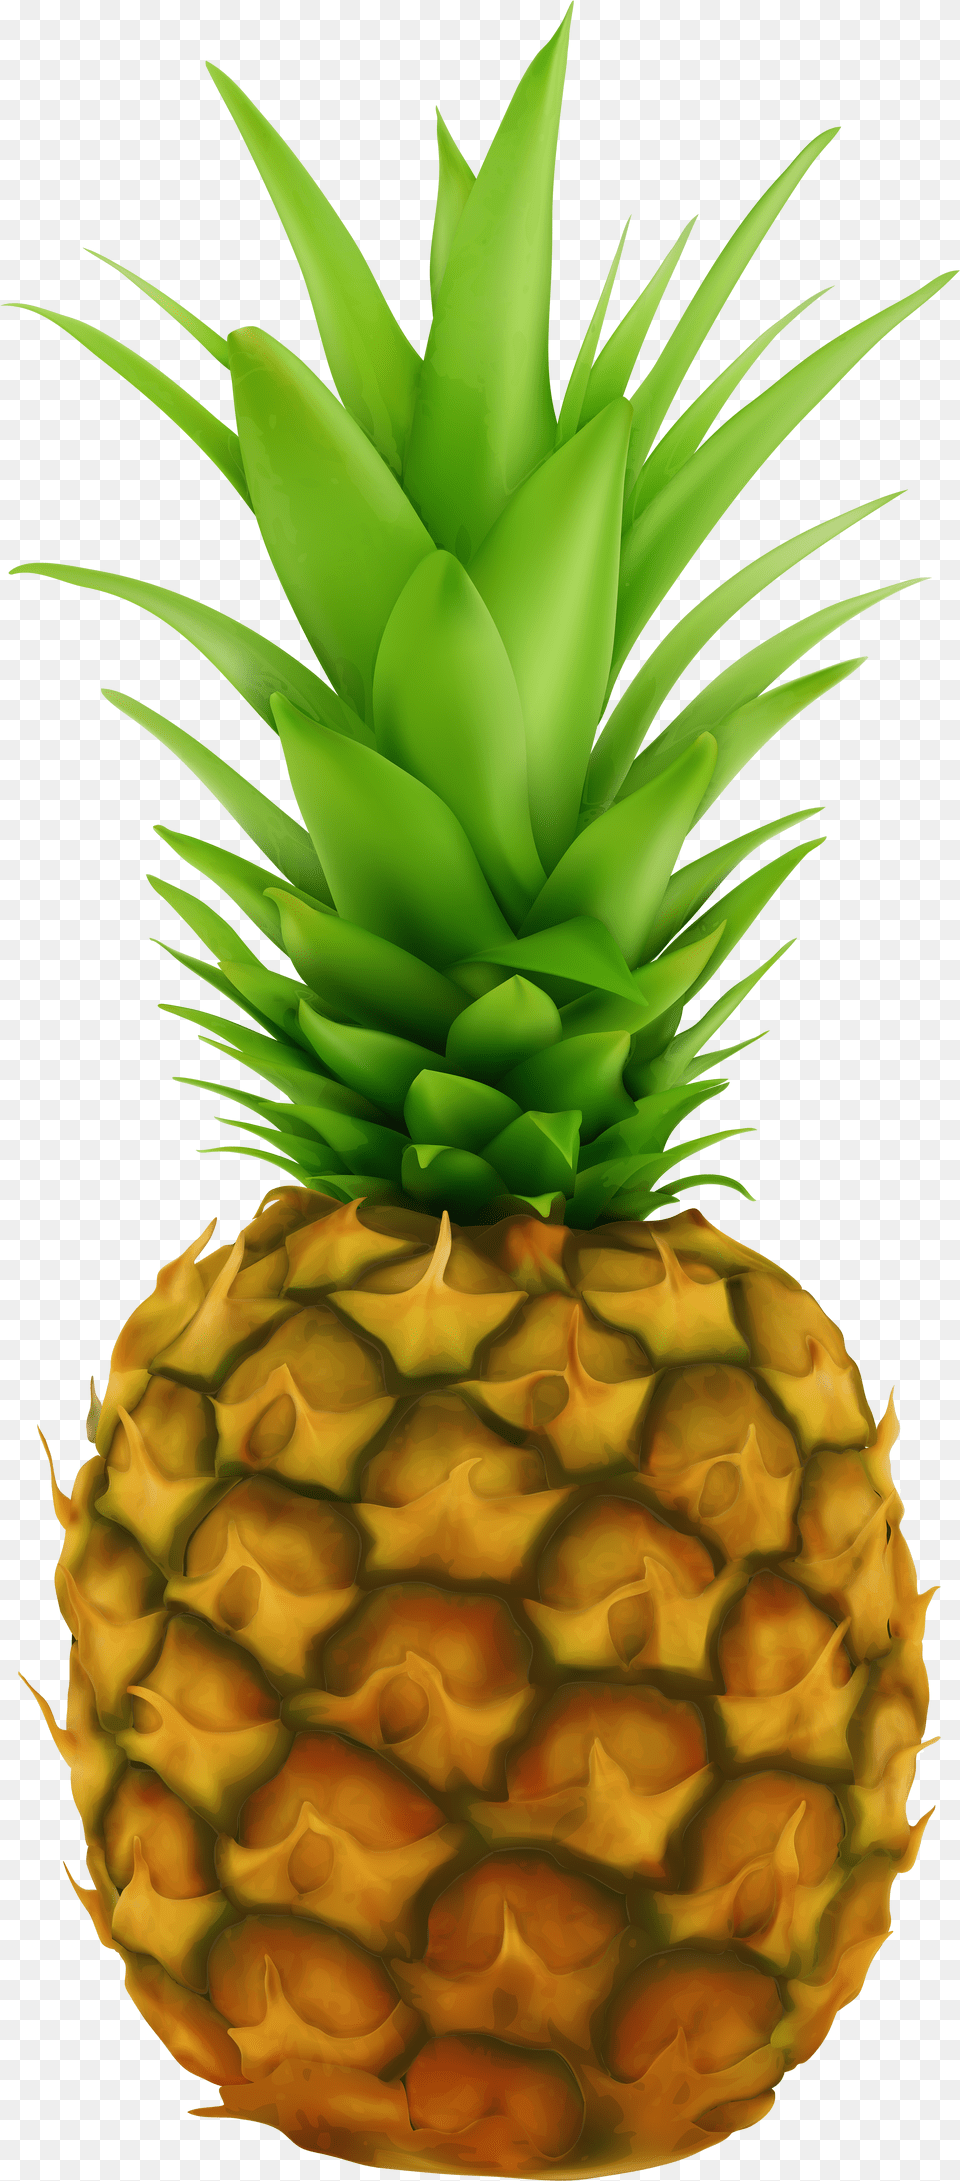 Pineapple Clip Art Pineapple Fruit Background, Box, Alcohol, Beer, Beverage Png Image